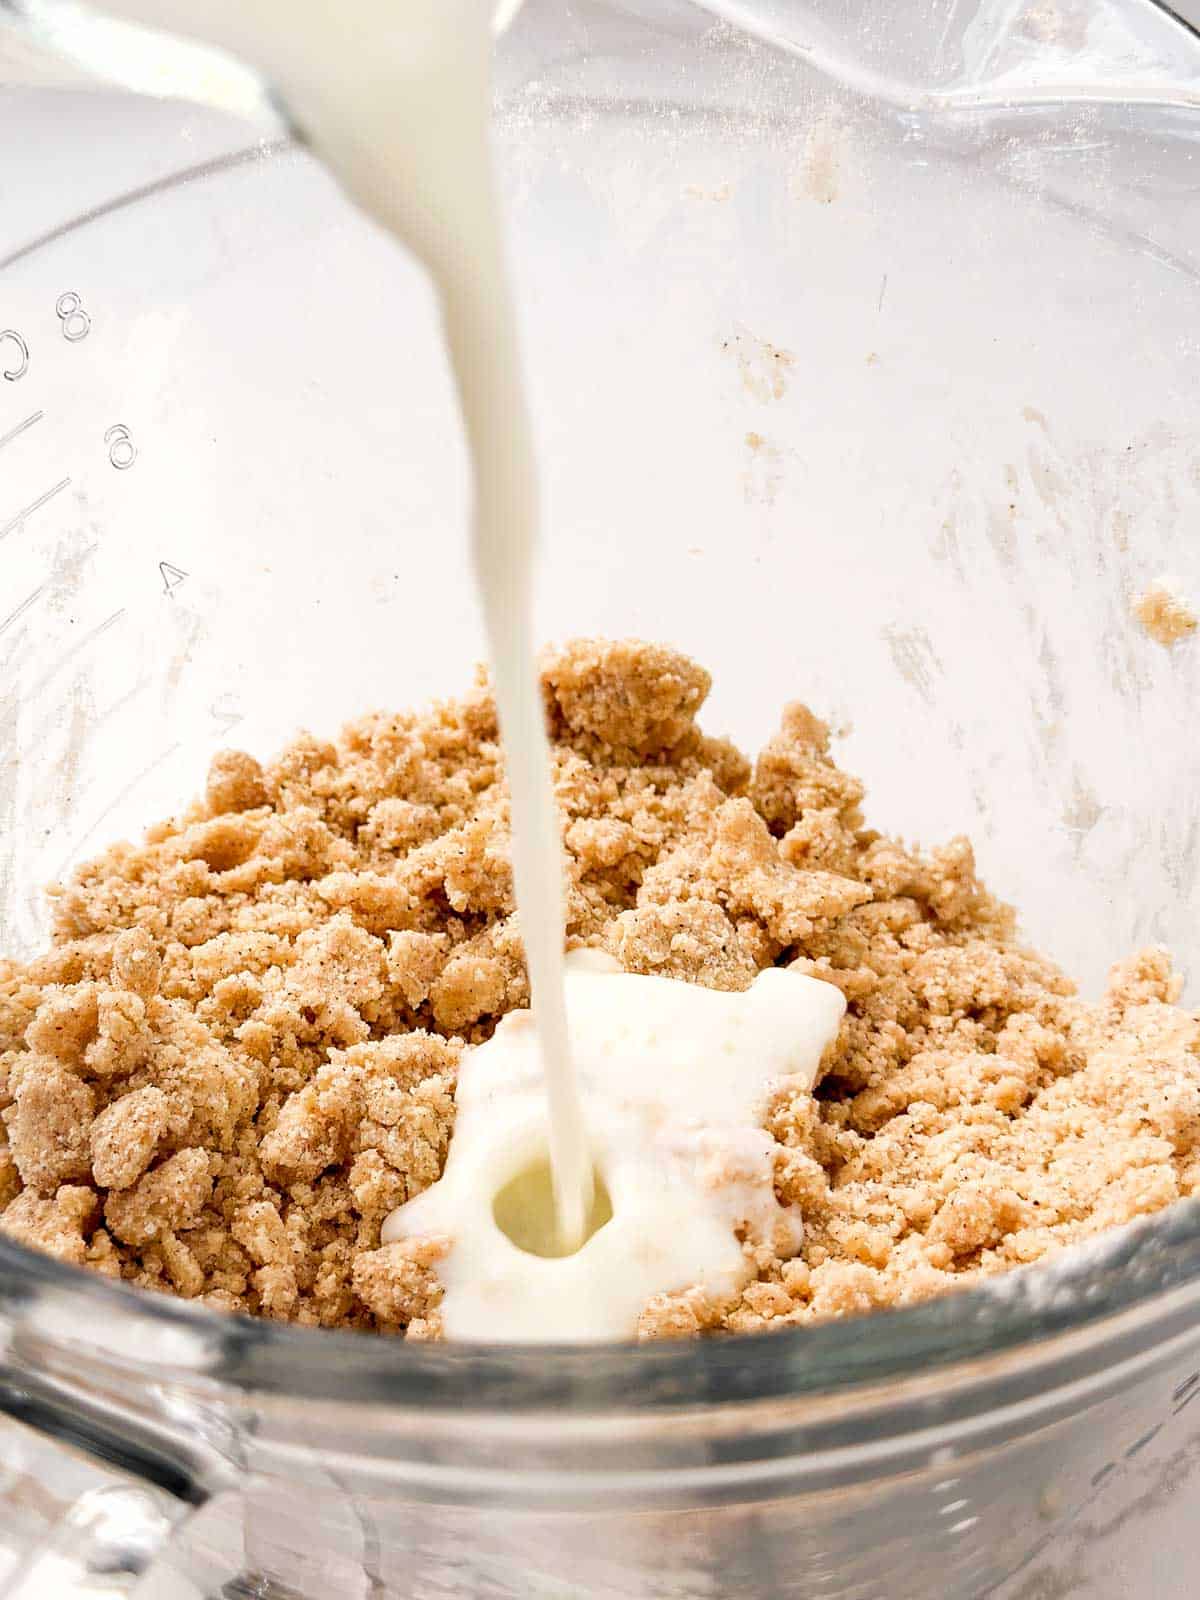 close up view of buttermilk pouring from glass jug over crumble mixture